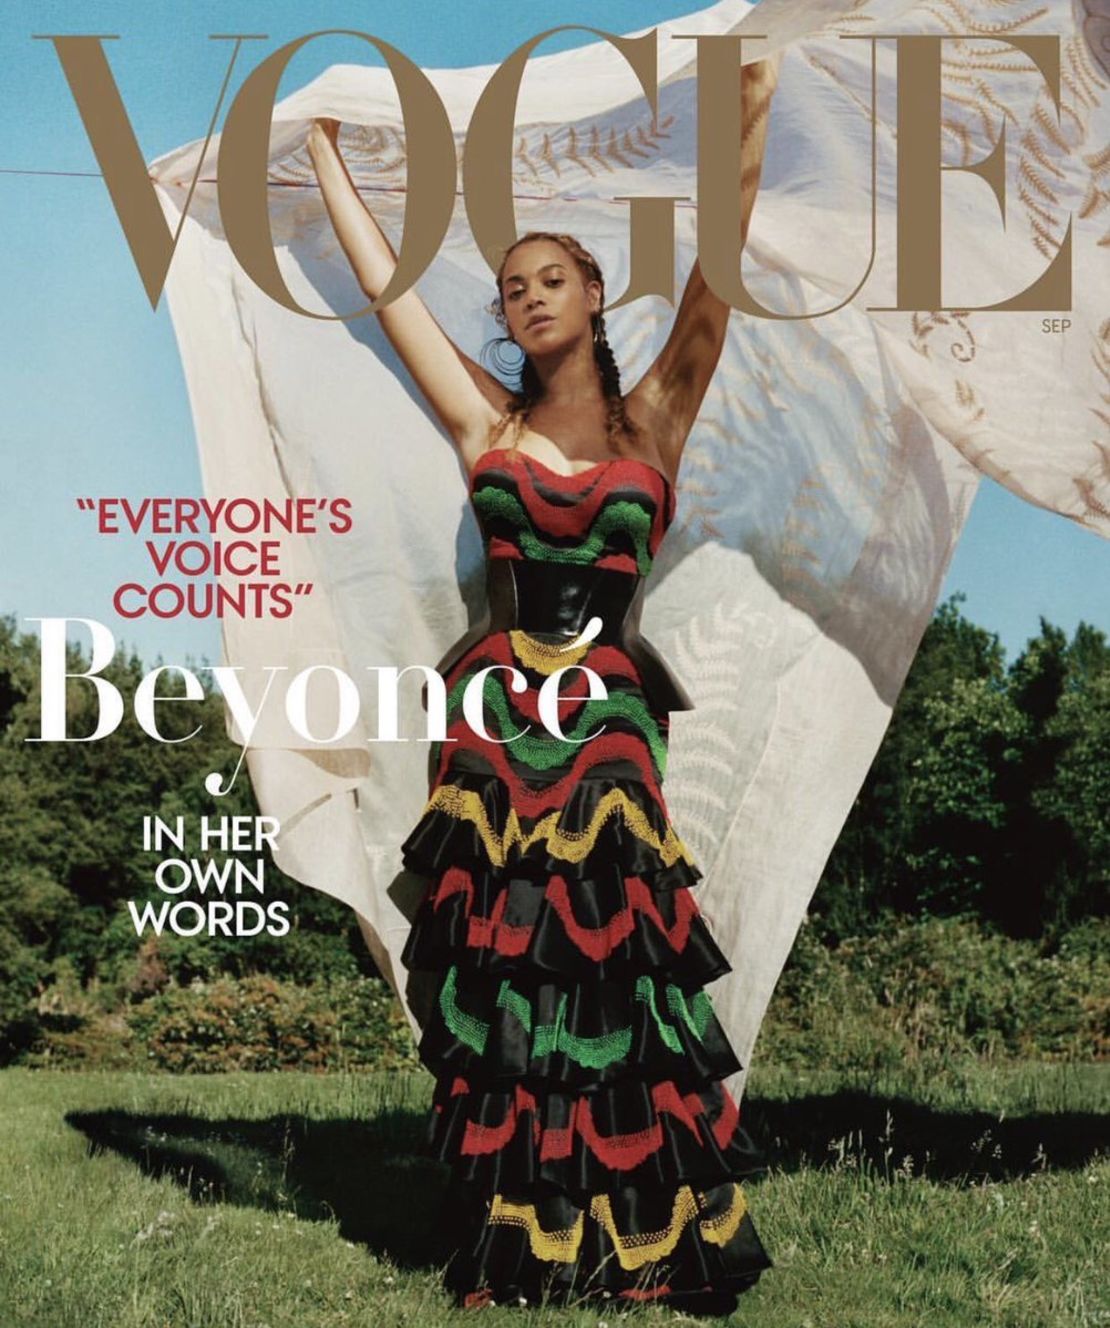 Beyoncé by photographer Tyler Mitchell for American Vogue's September issue